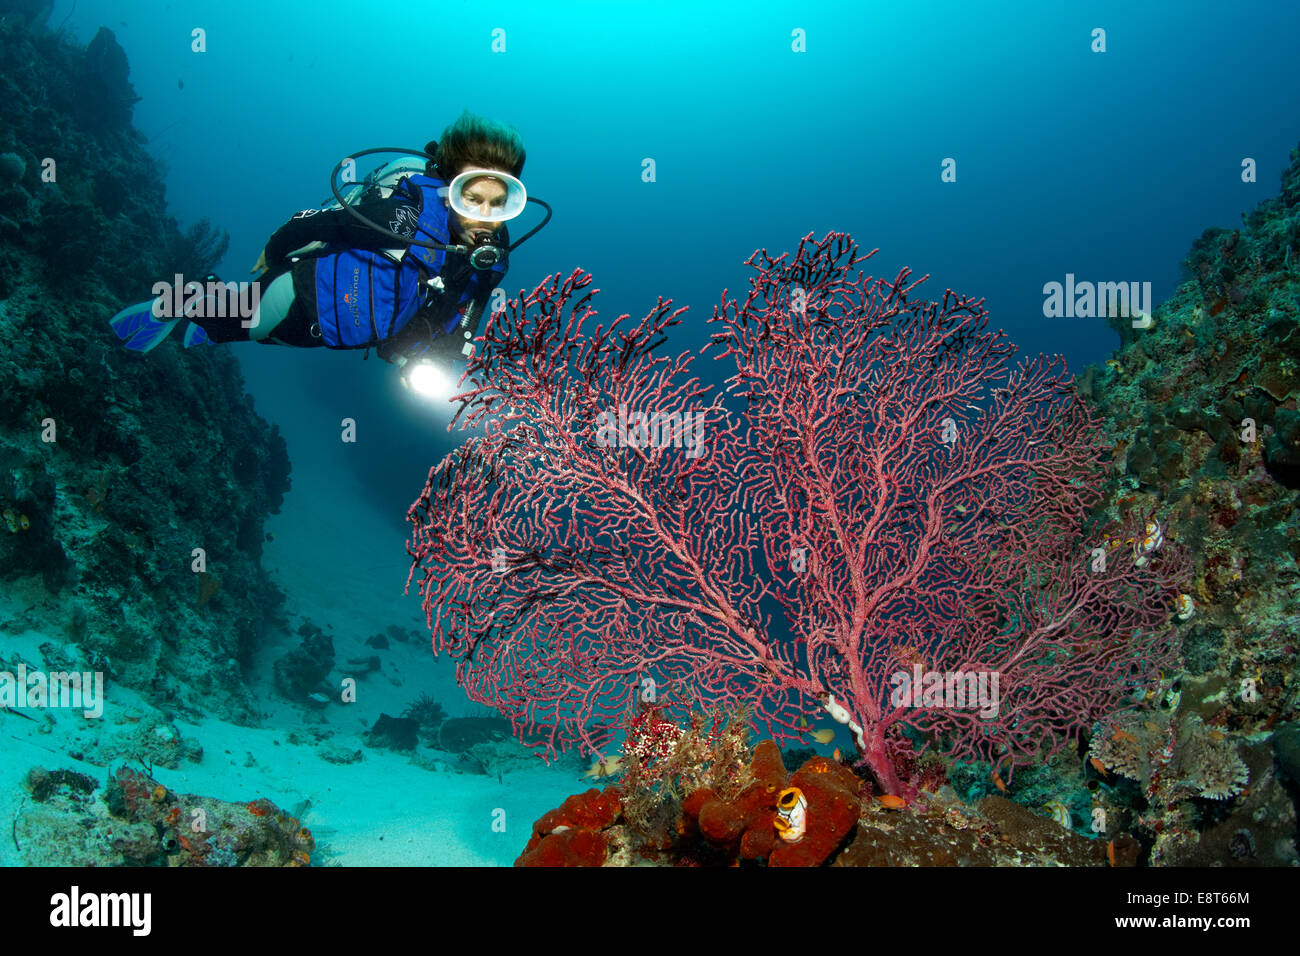 Female scuba diver looking at a Gorgonian, Fan Coral, Soft Coral, UNESCO World Heritage Site, Great Barrier Reef, Australia Stock Photo